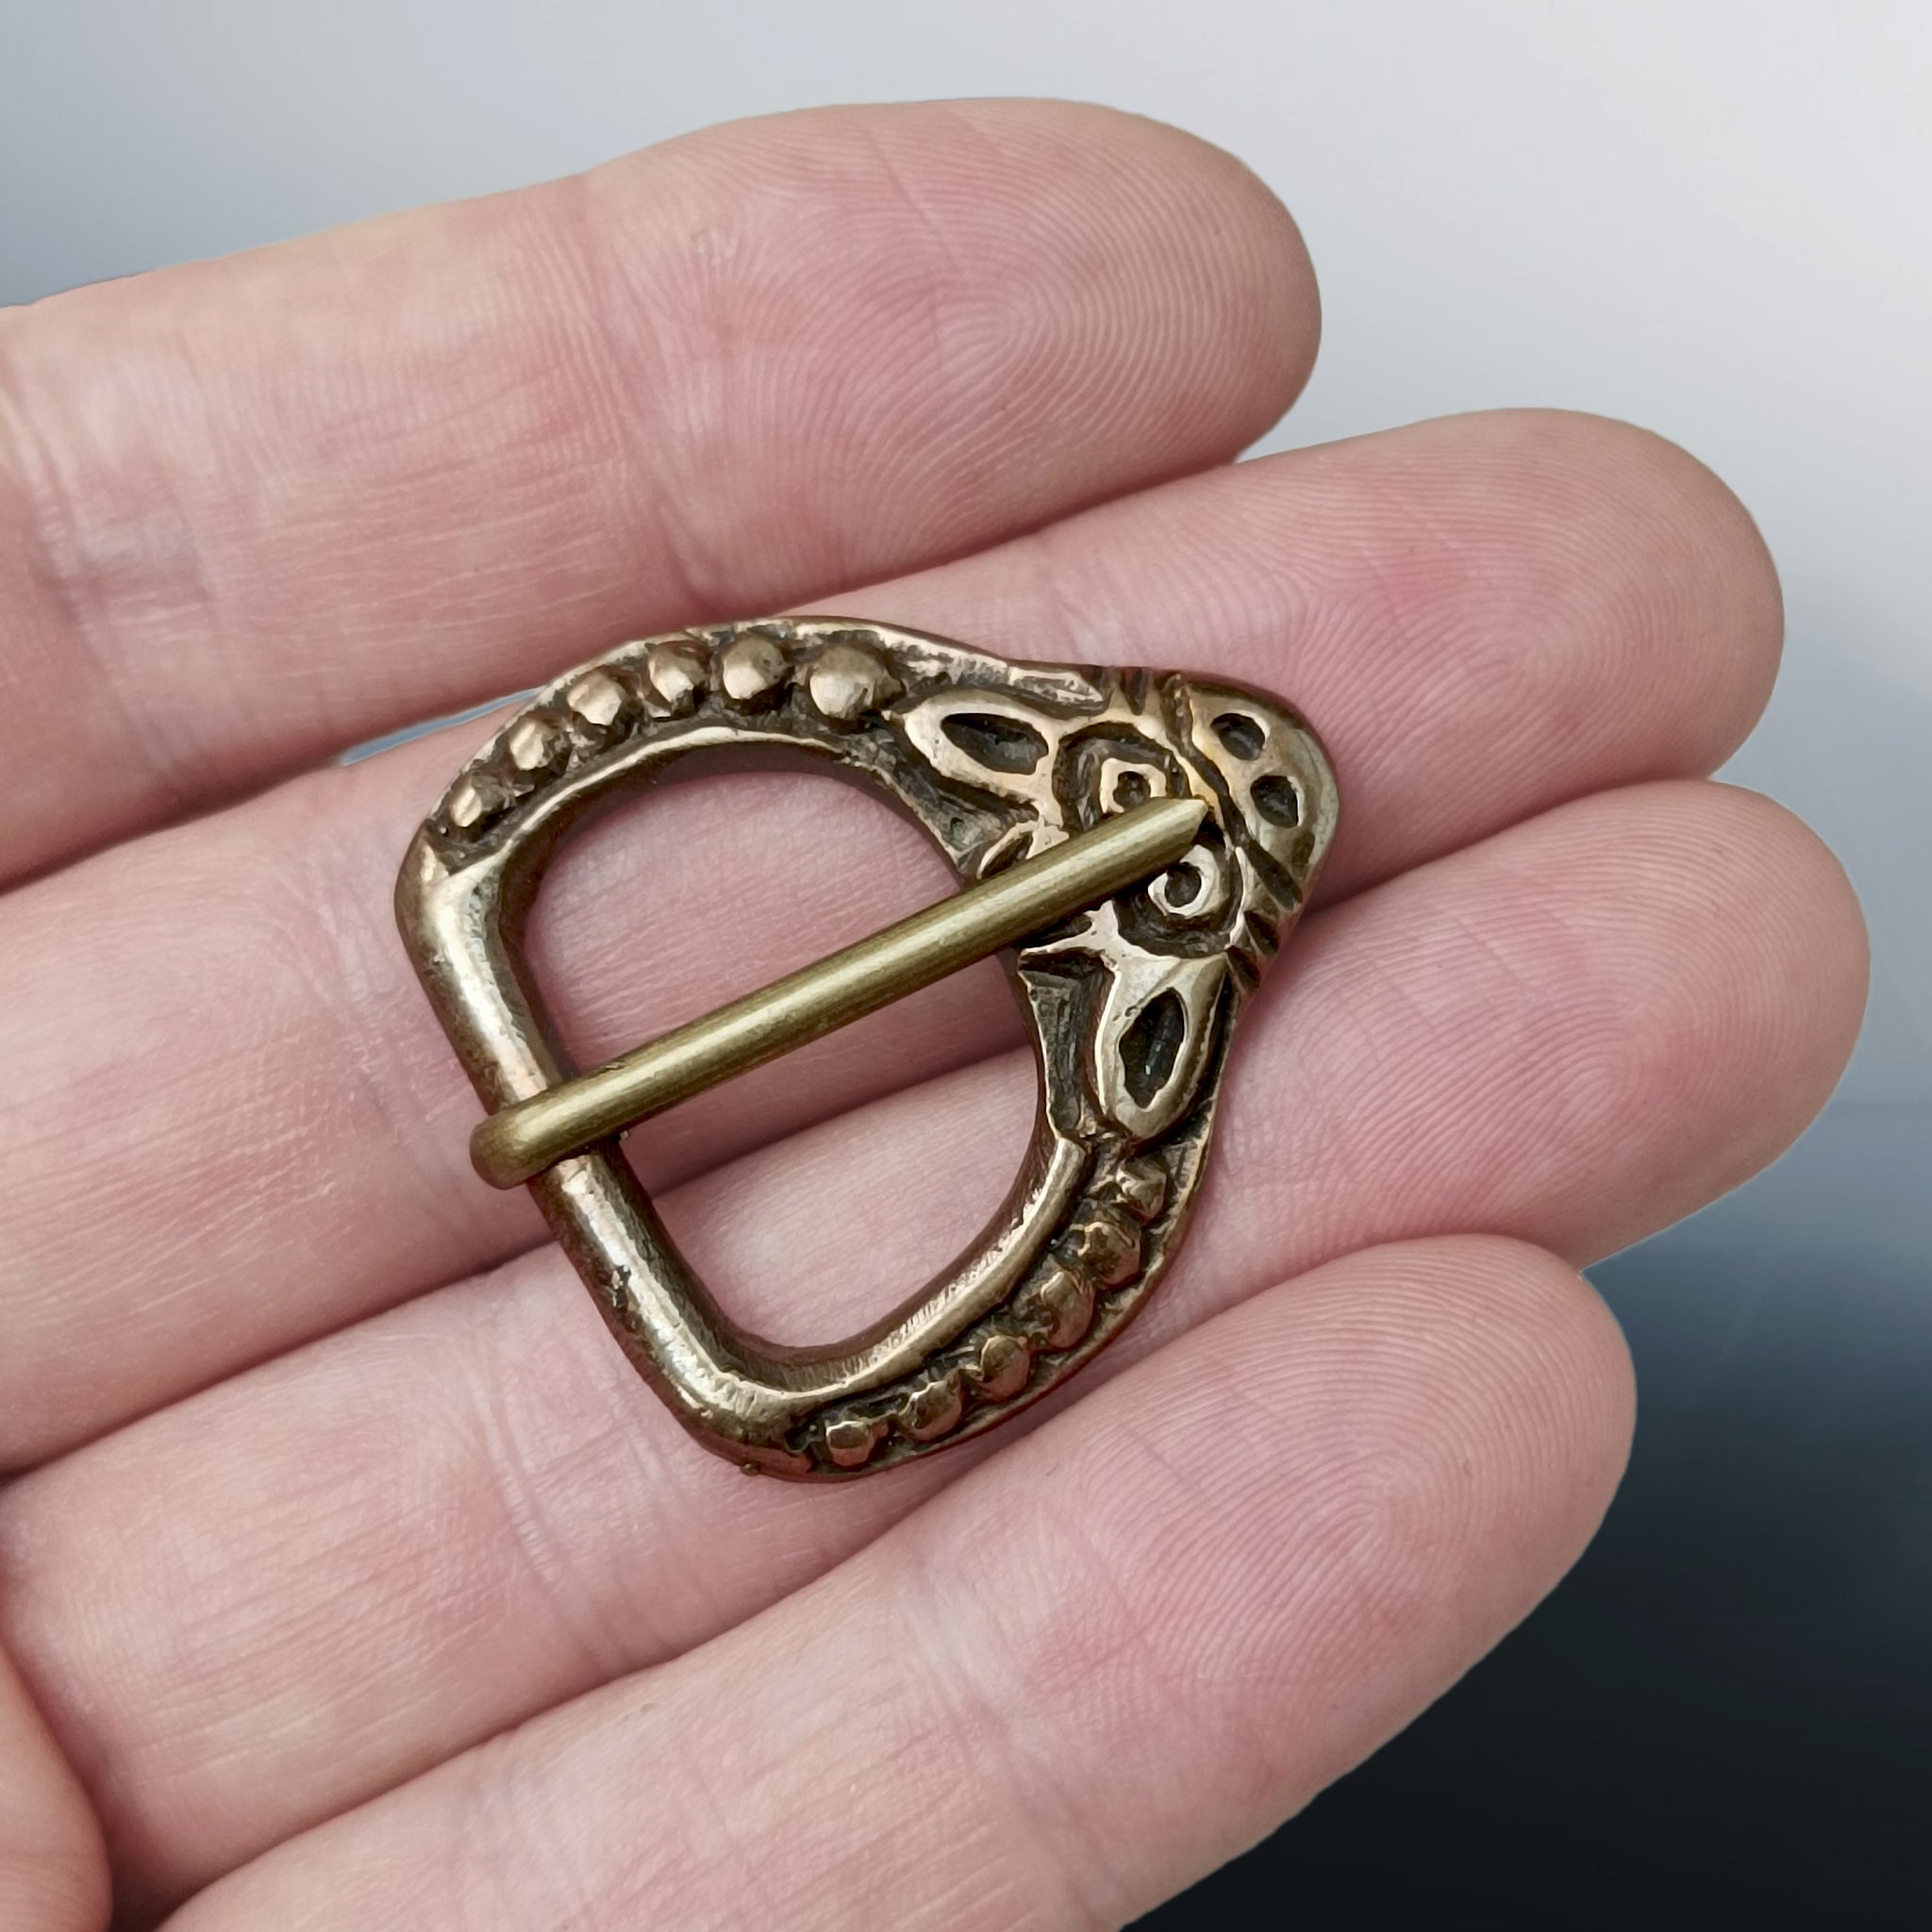 9th - 11th Century Replica Viking Bronze Buckle with Animal Head on Hand